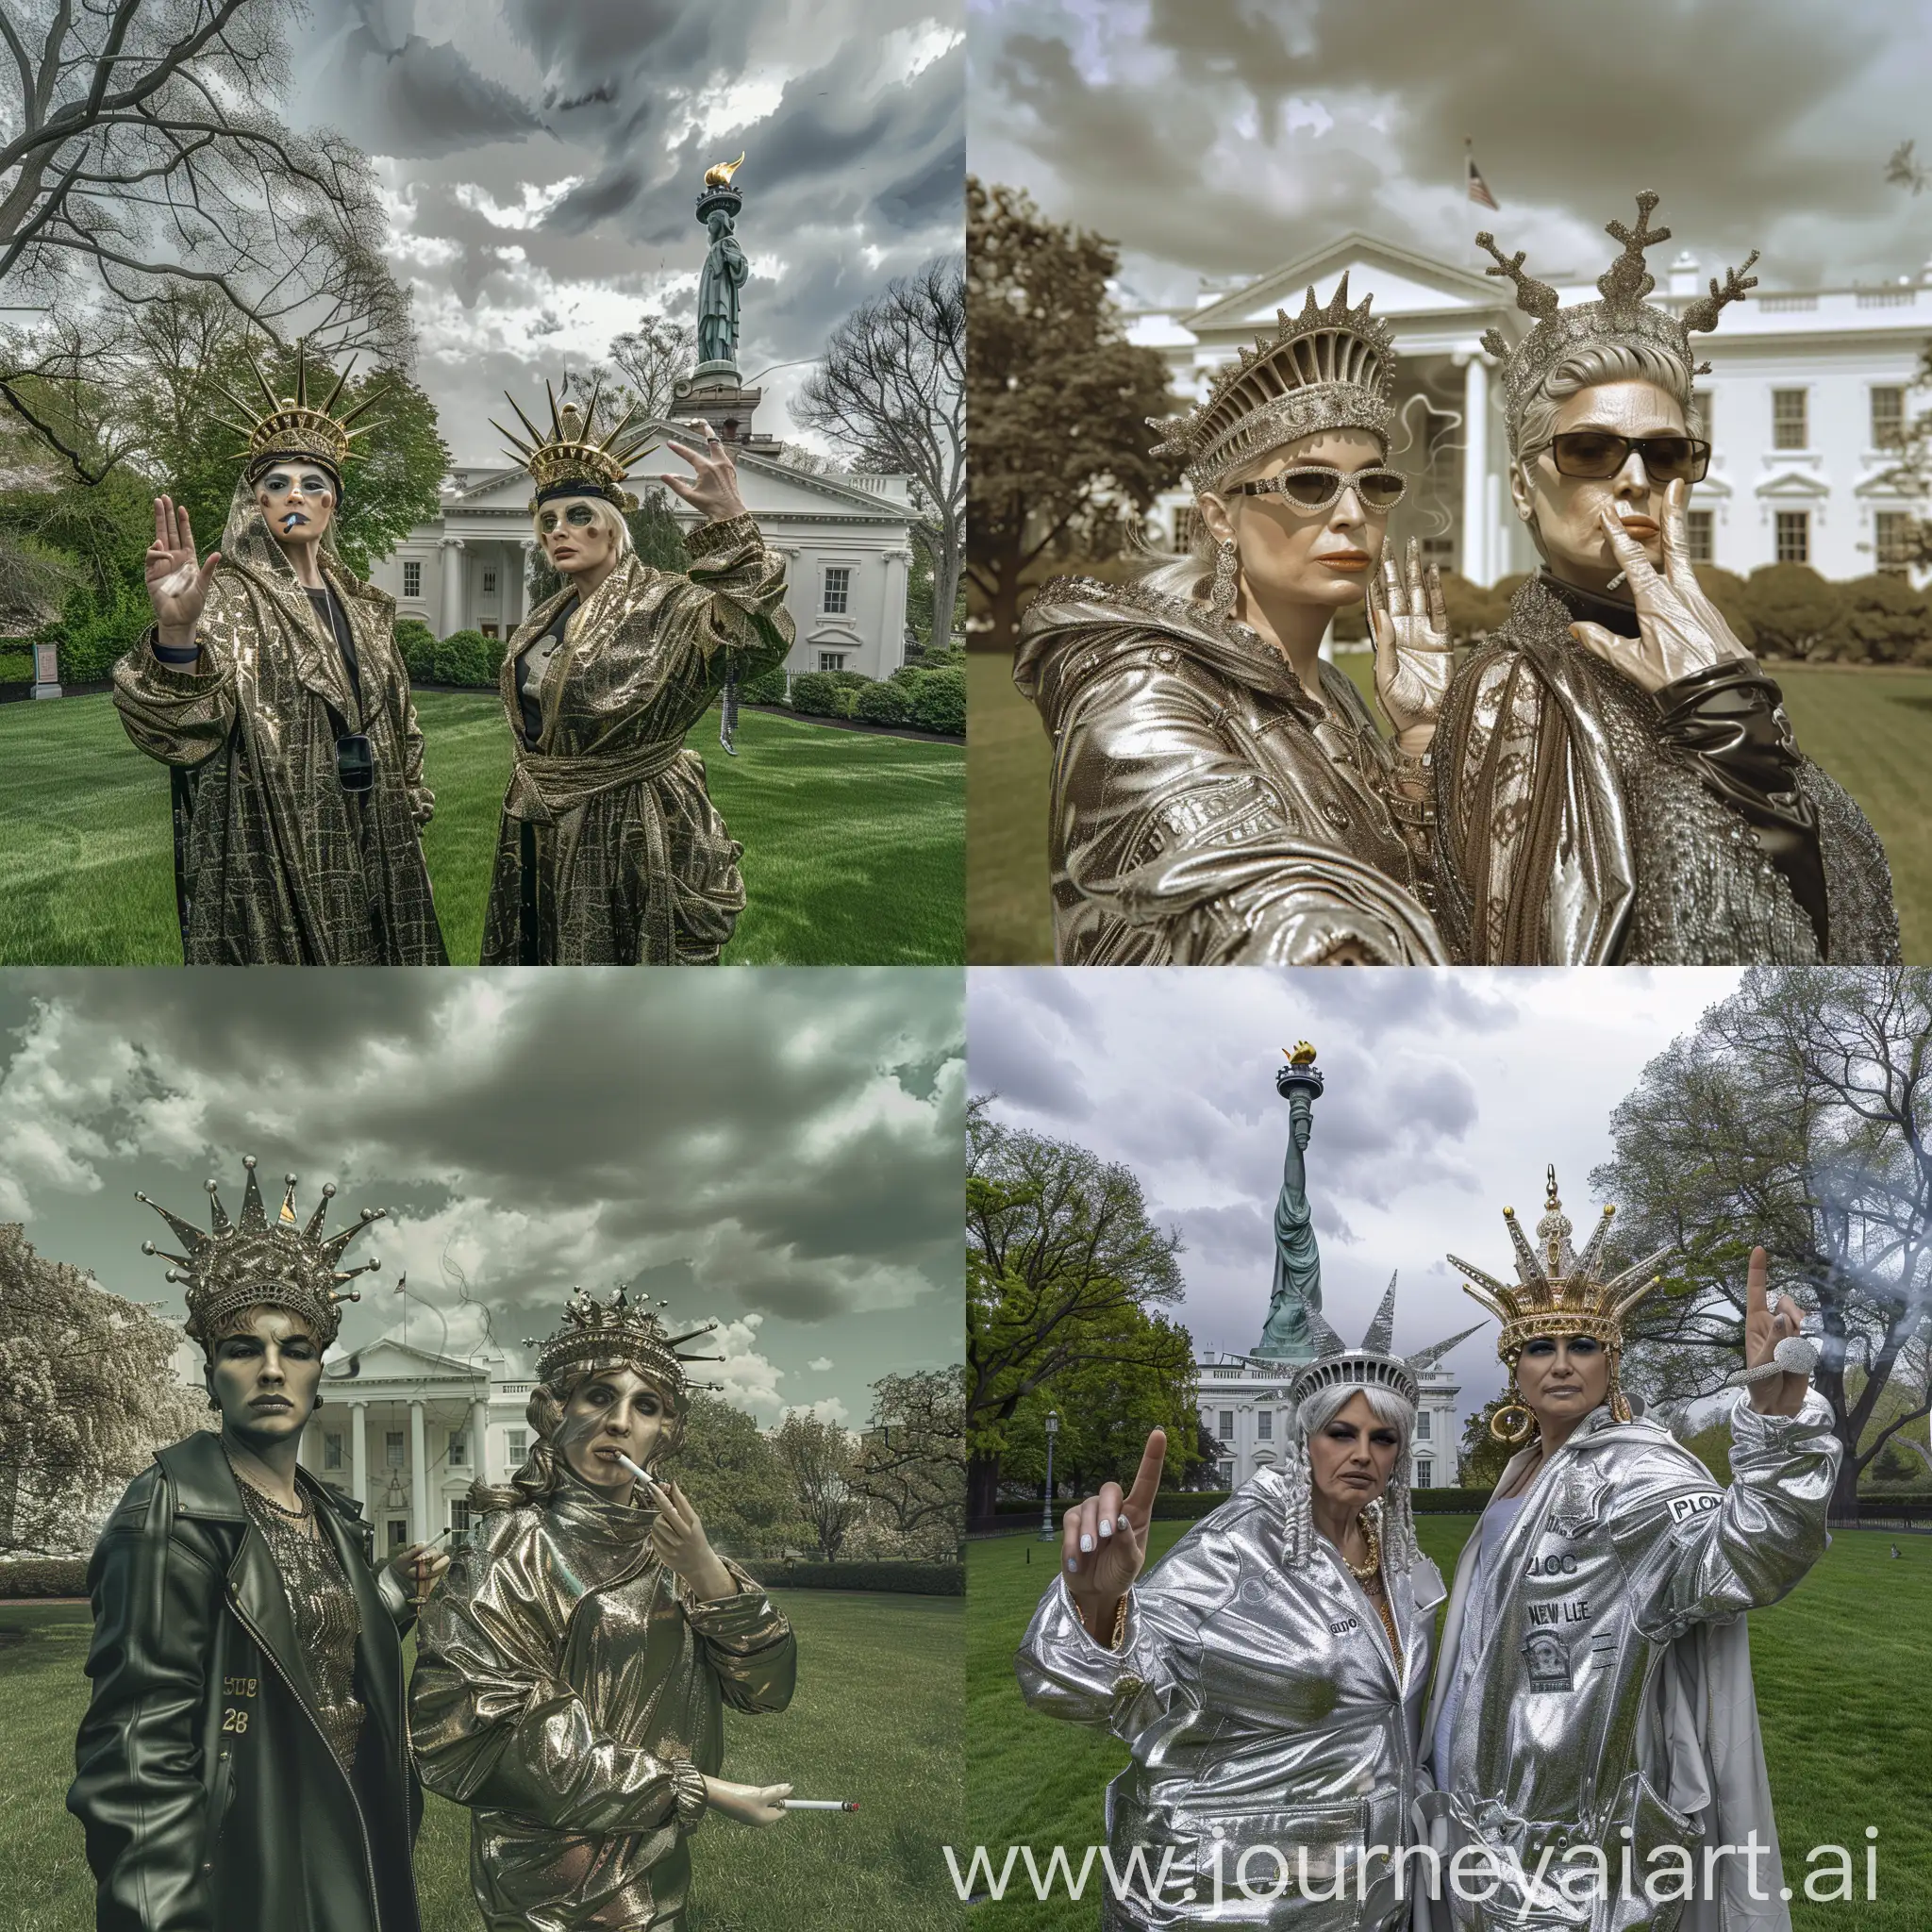 birdview, 8k,ultradetailed,Two New York police arrested realook Madonna Ciccone with same as same of the Statue of Liberty suit,robe,  who has a 28 year old Madonna Ciccone real face ,she wear the Statue of Liberty crown, whitehouse, lawn, realhandfingers,smoking around ,laterspring, cloudy,